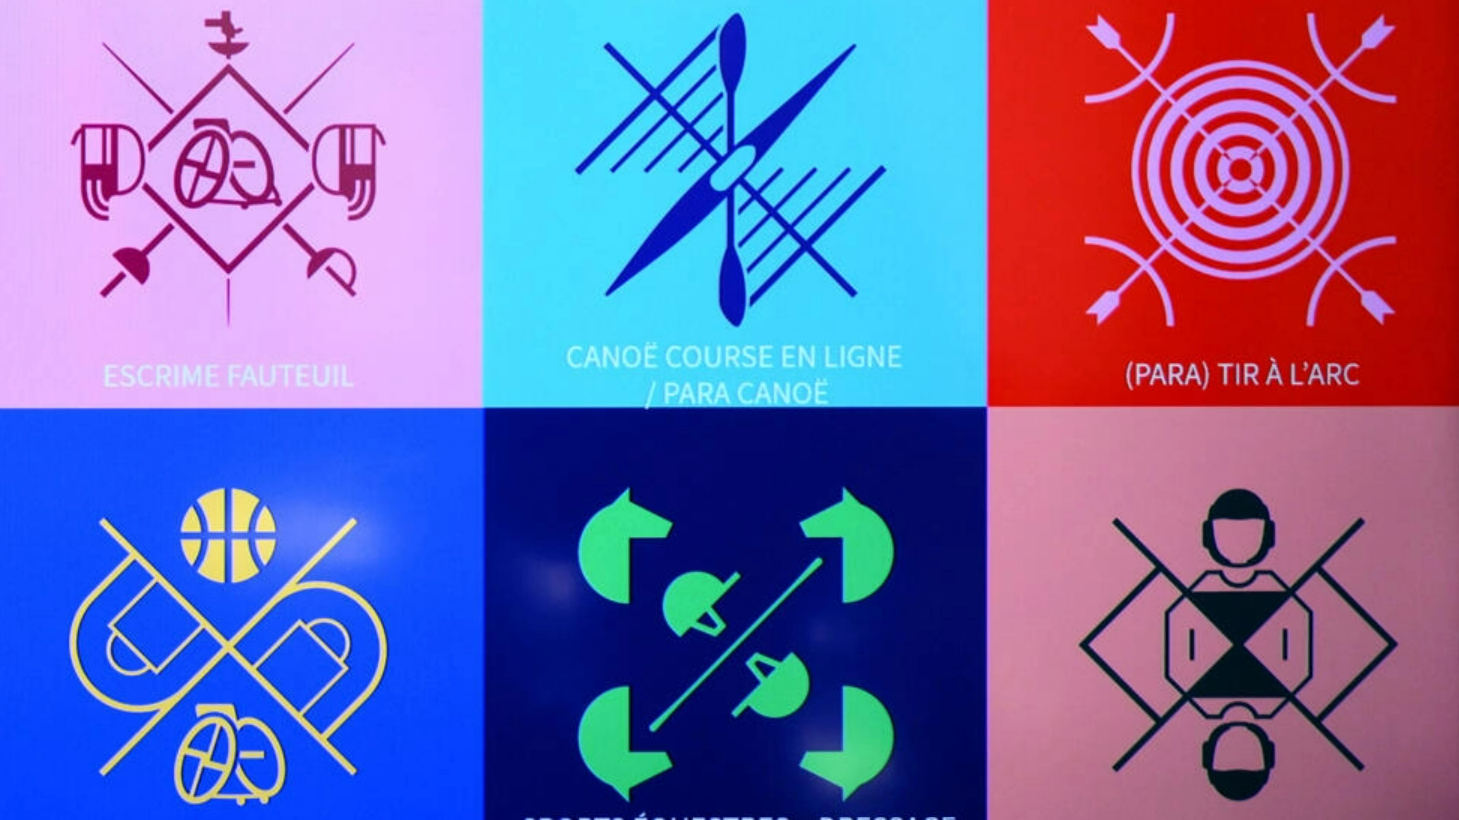 Paris 2024 Head of Design speaks of "test" to "break" literal images for sports pictograms